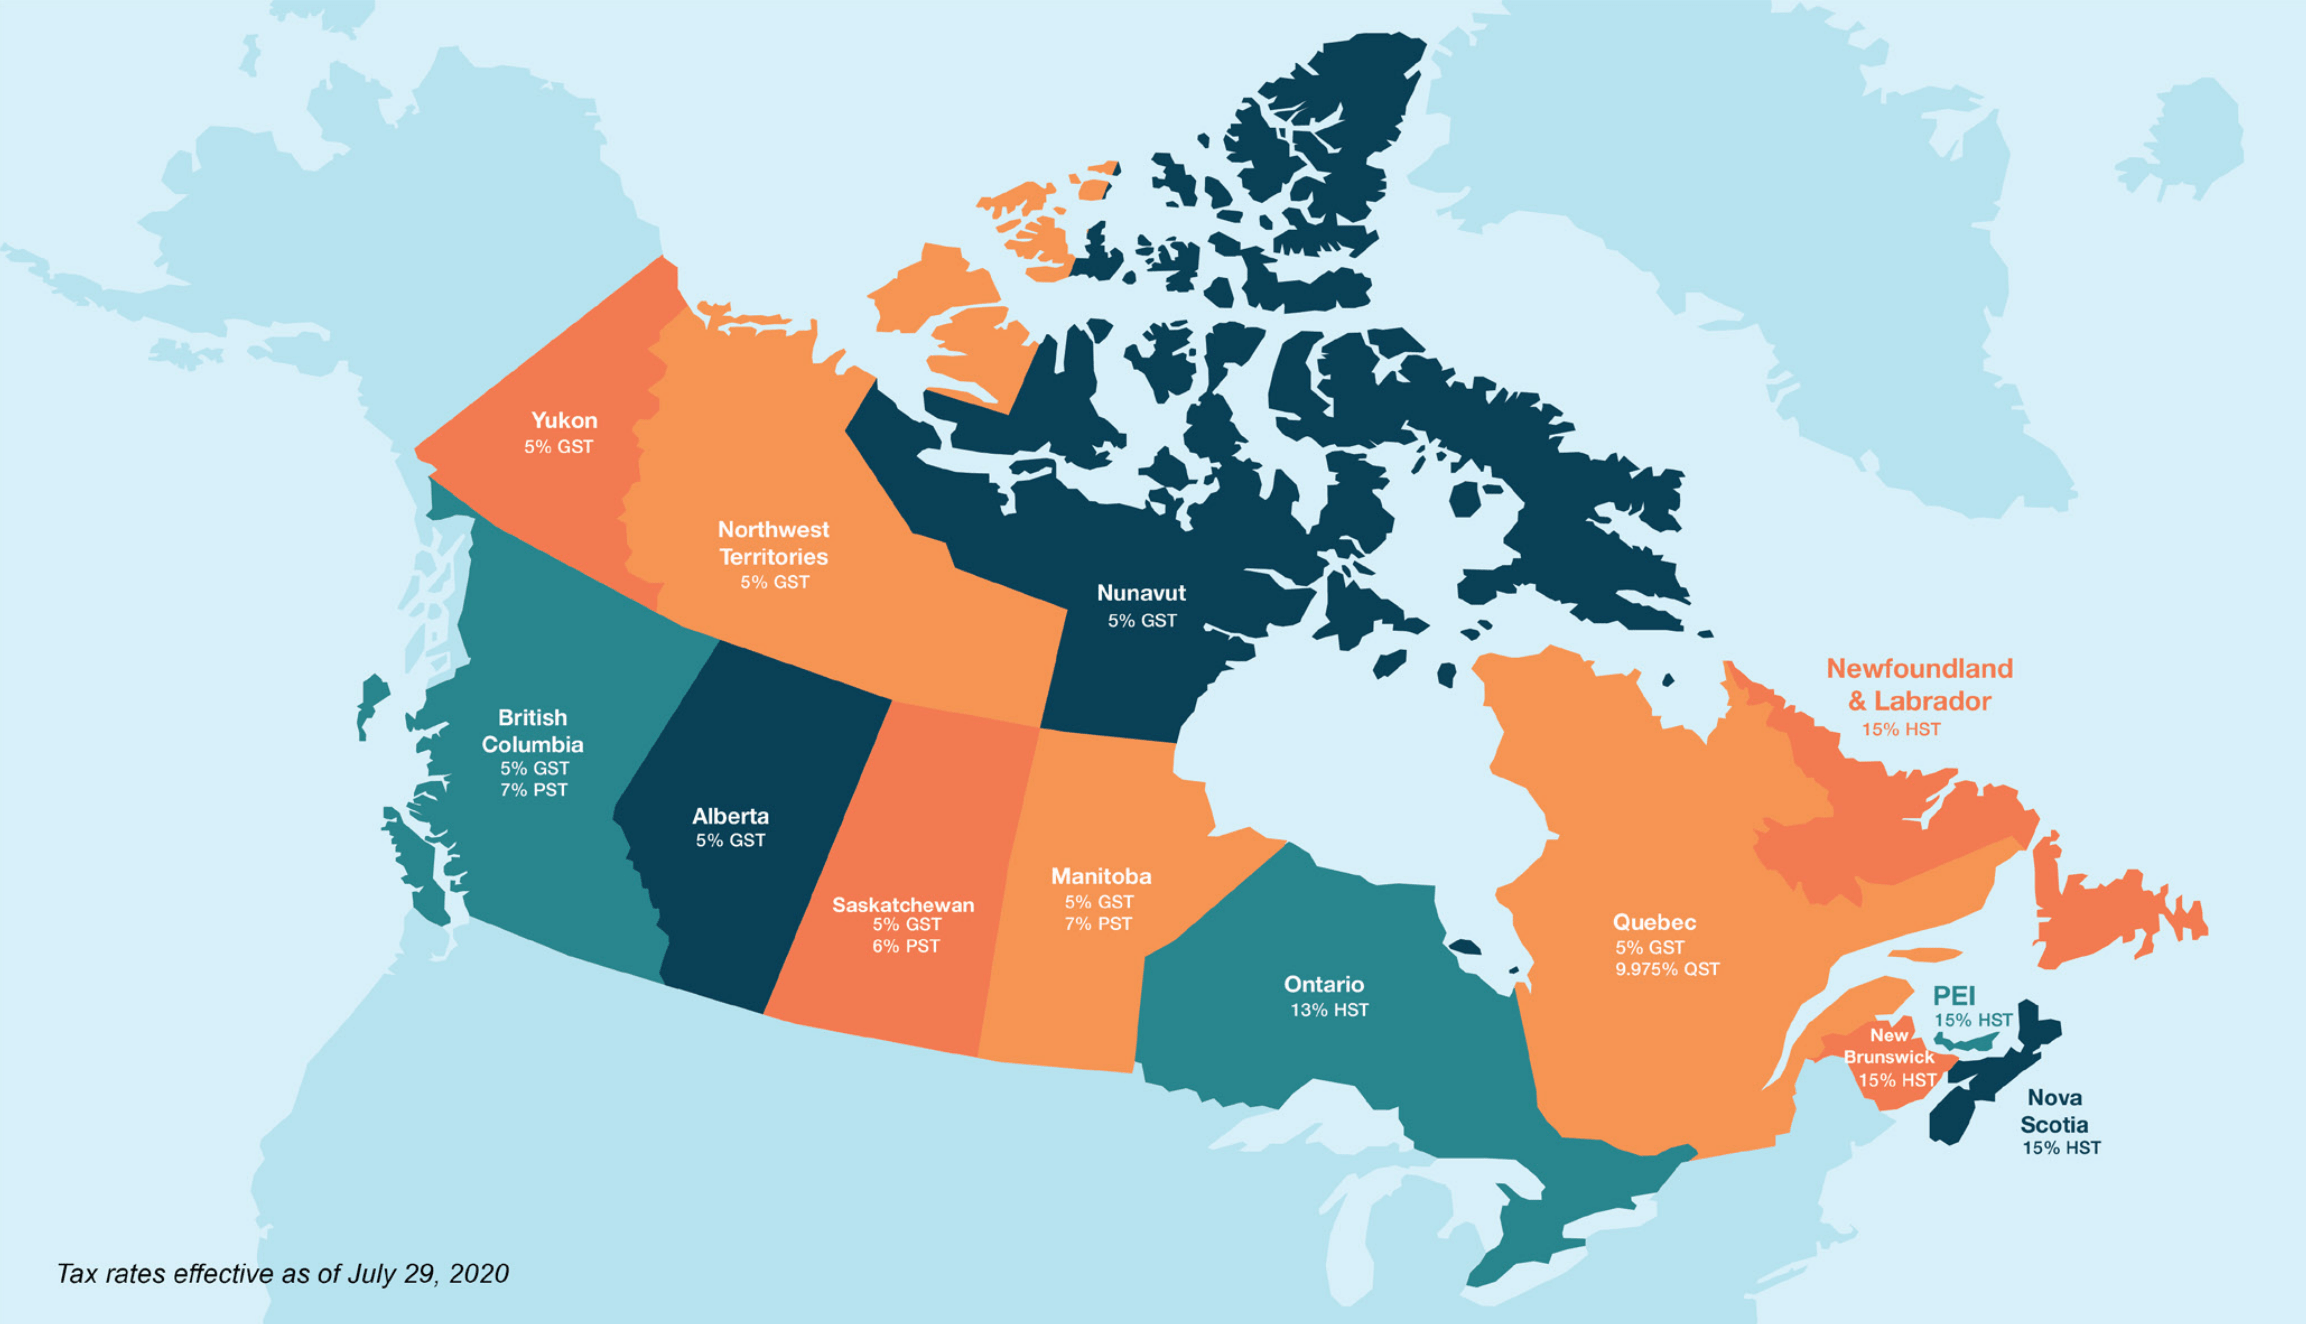 A map of Canada showing all the different sales tax rates by region